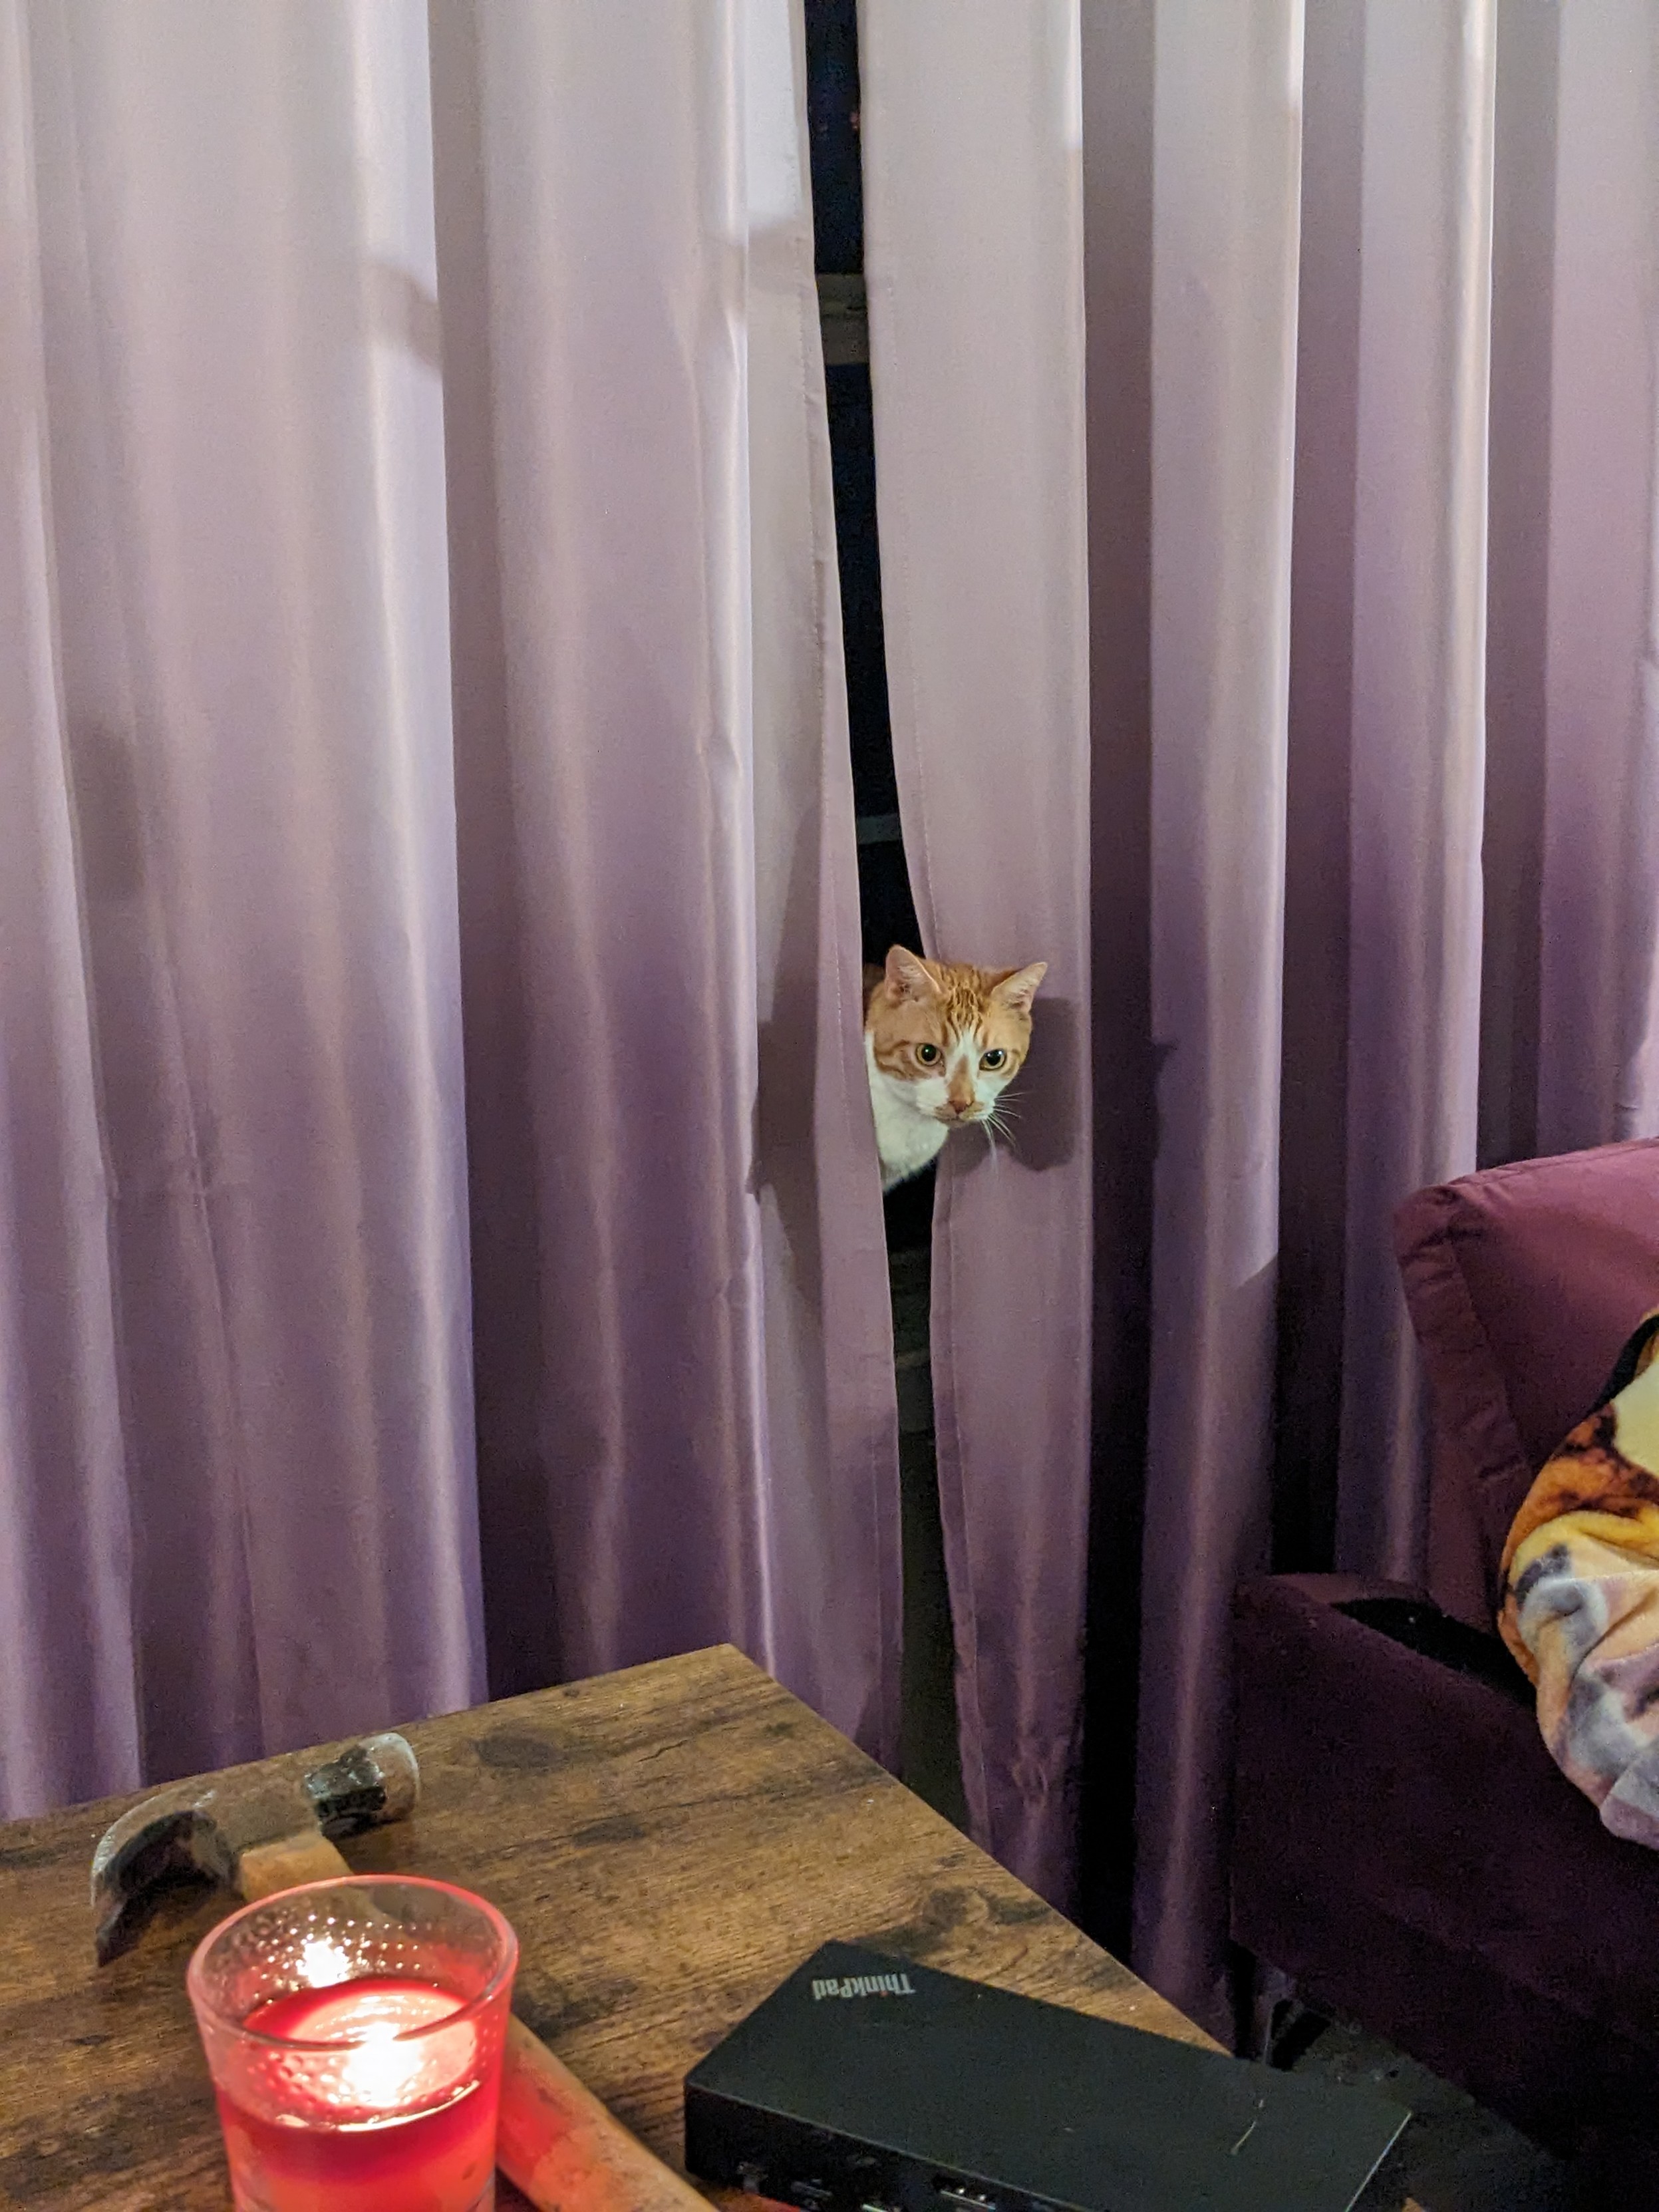 A picture of pink and purple curtains, with an orange cat head peeking out and looking towards the camera. In the foreground is a candle, hammer, and computer dock on a small table. Cheddar looks like he is about to cause mischief. 